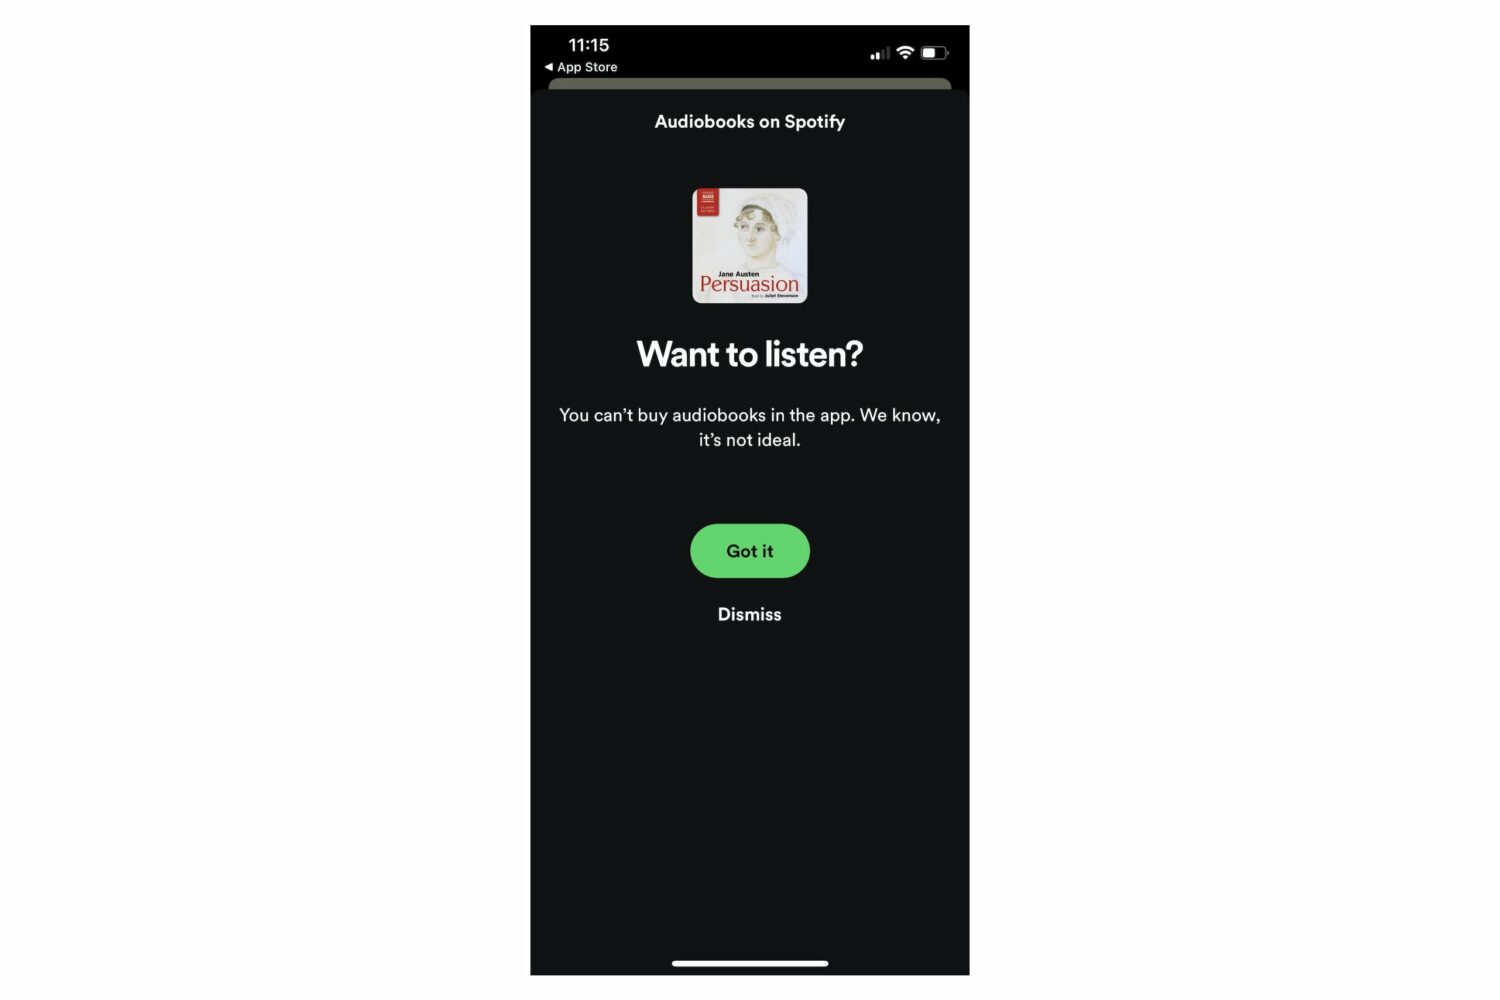 Spotify for iPhone screenshot showing a message the user sees when trying to buy an audiobook through the app